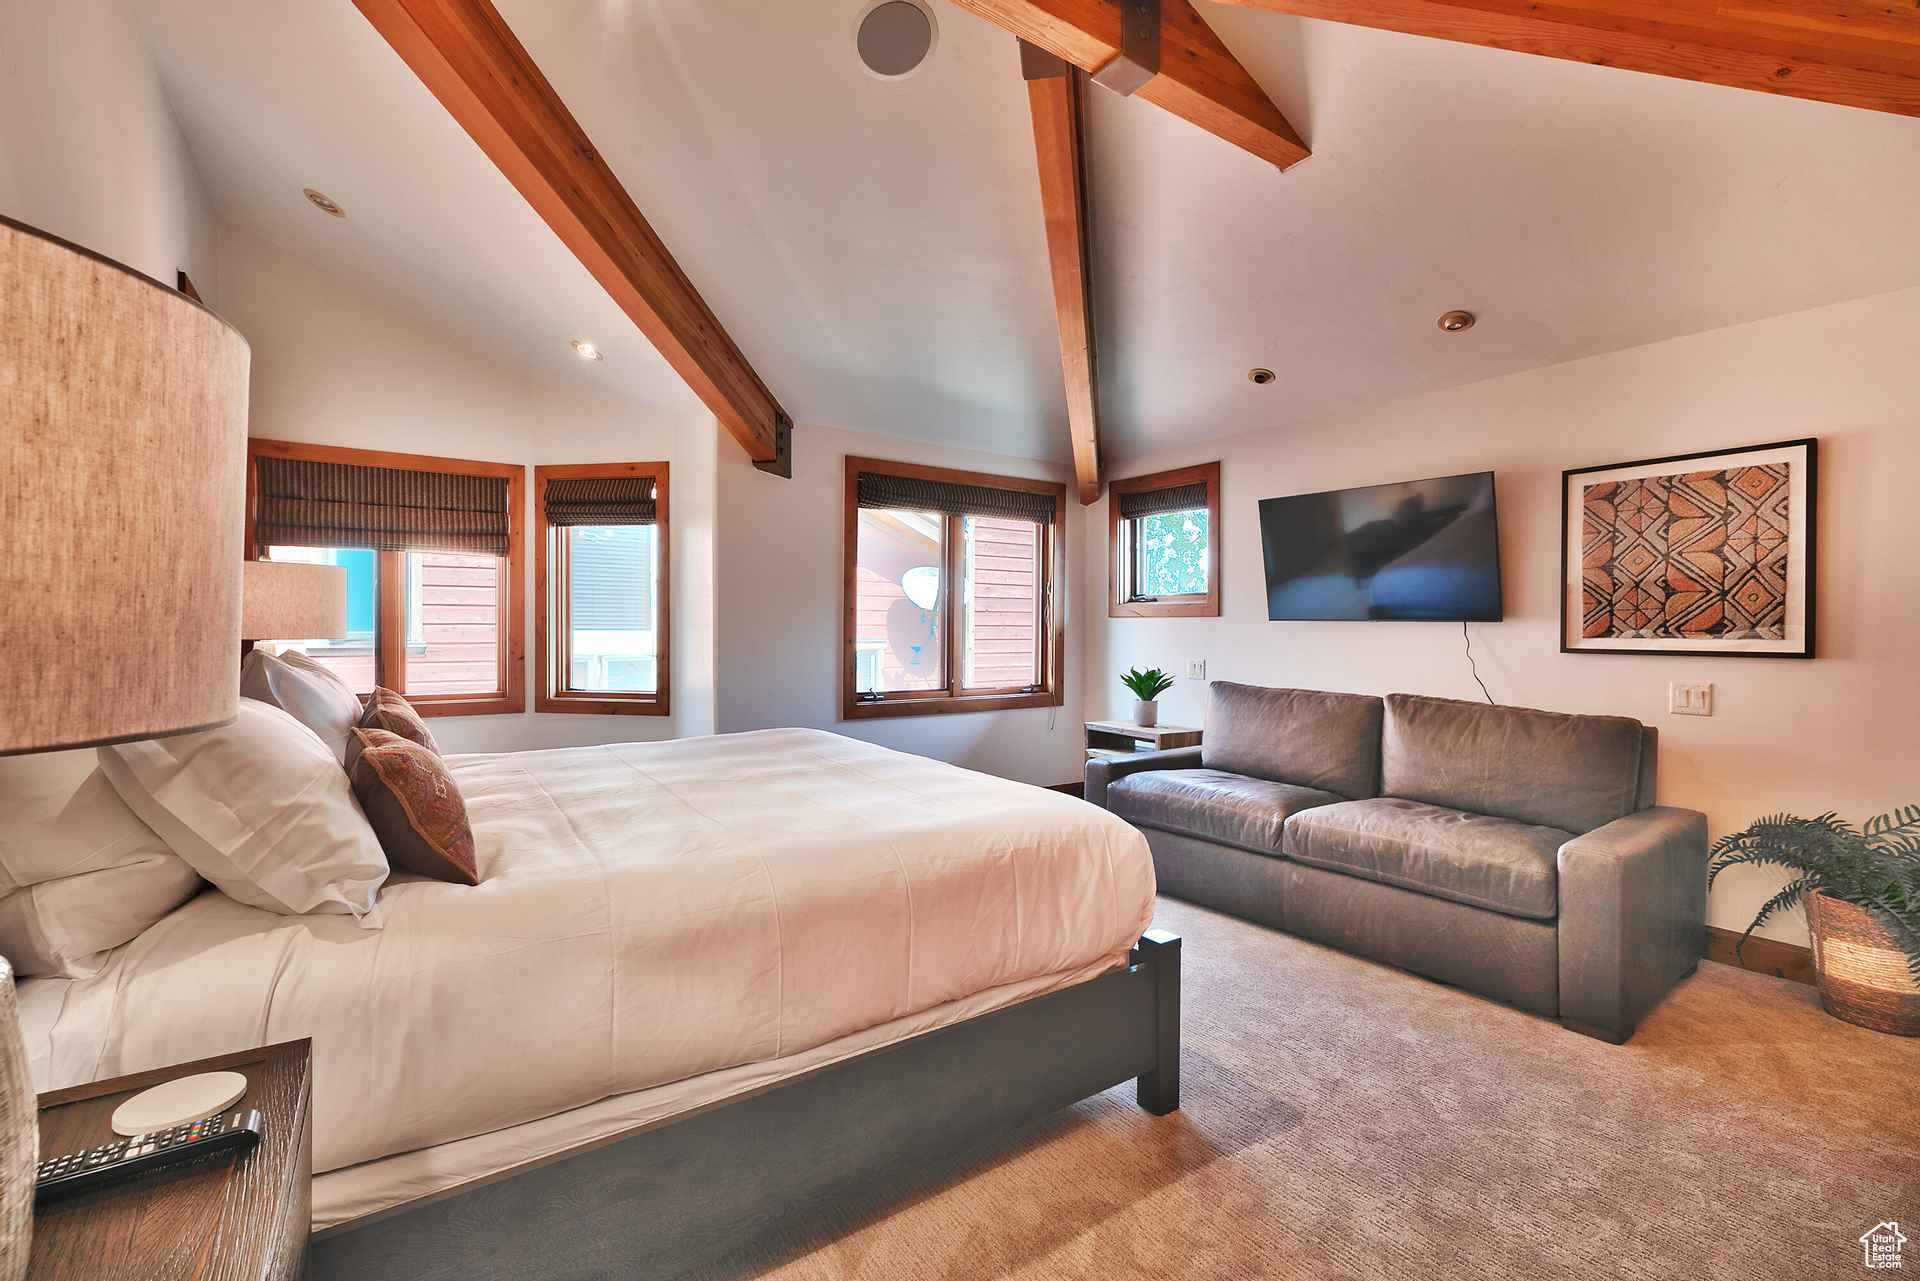 Carpeted bedroom featuring vaulted ceiling with beams and multiple windows